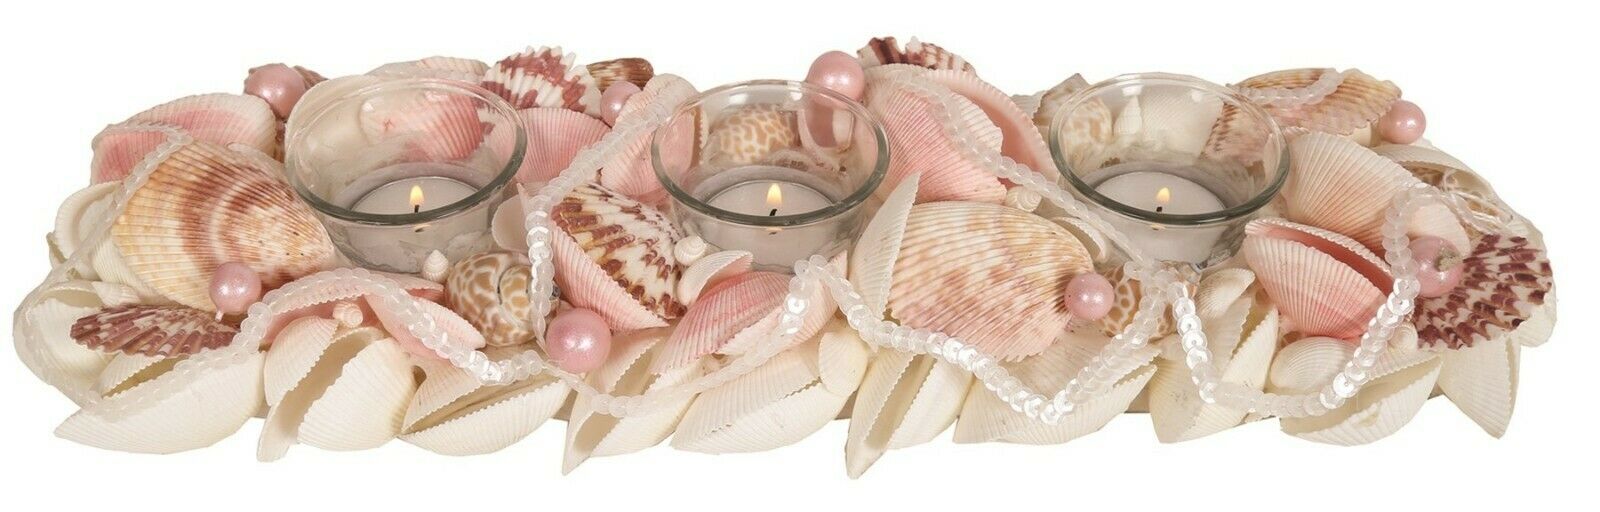 Decorative Sea Shell Tea Light Holder Pink Accents Holds 3 Tea Lights Candles